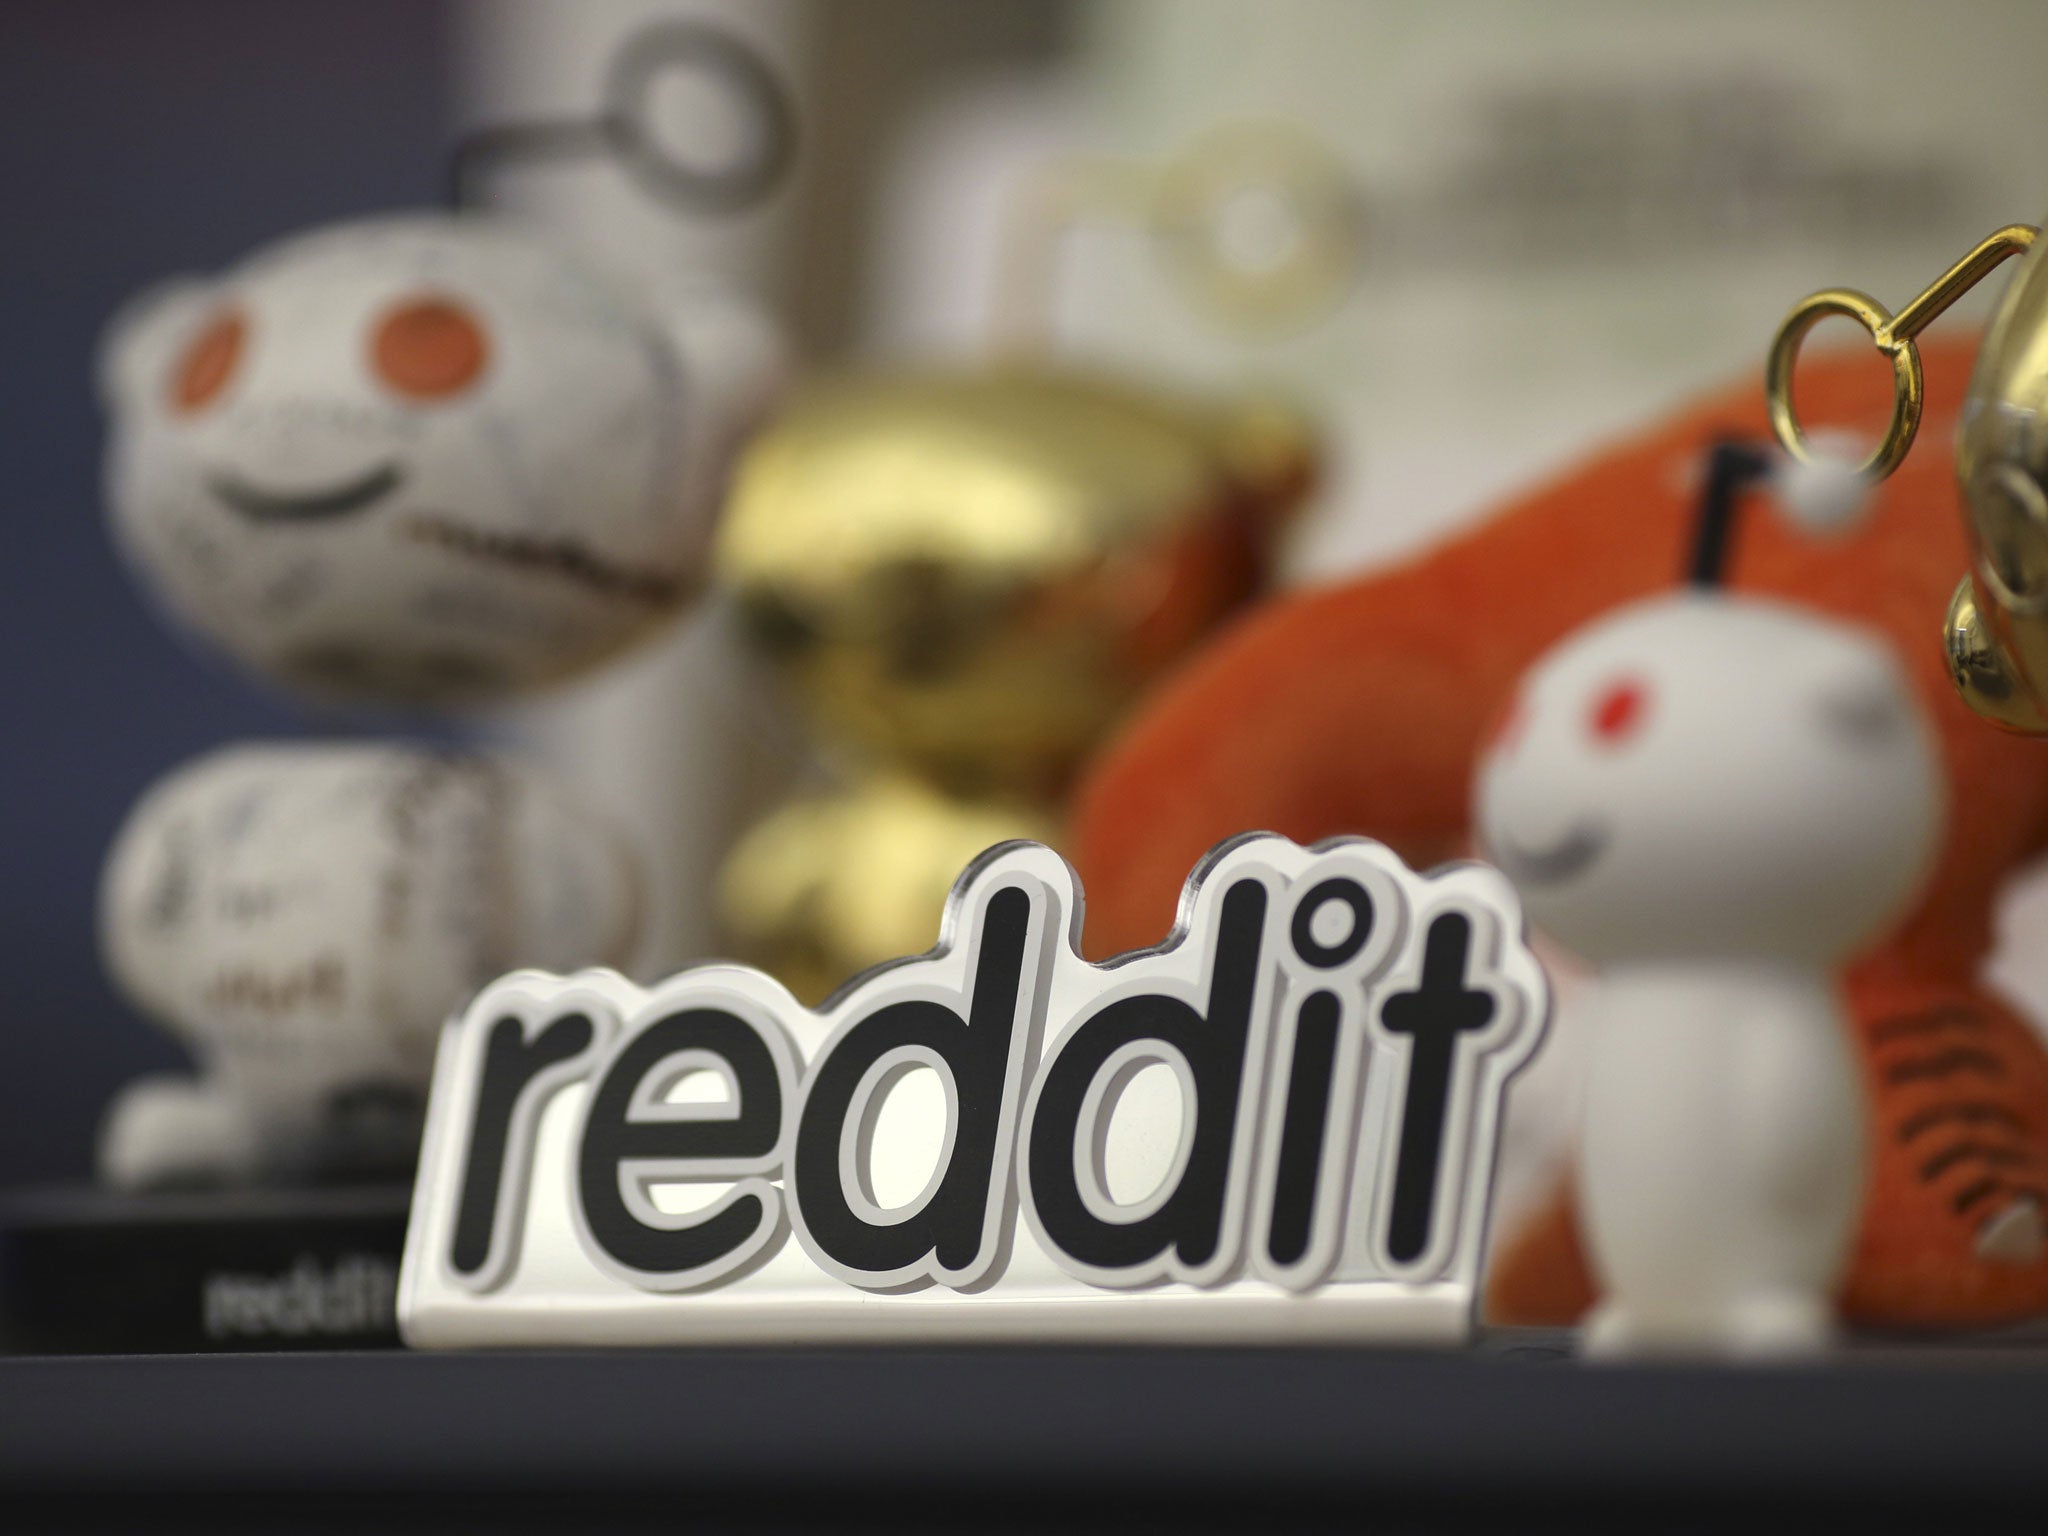 Baby Nude Porn - Reddit bans 'revenge porn', tries to stop future nude photo ...